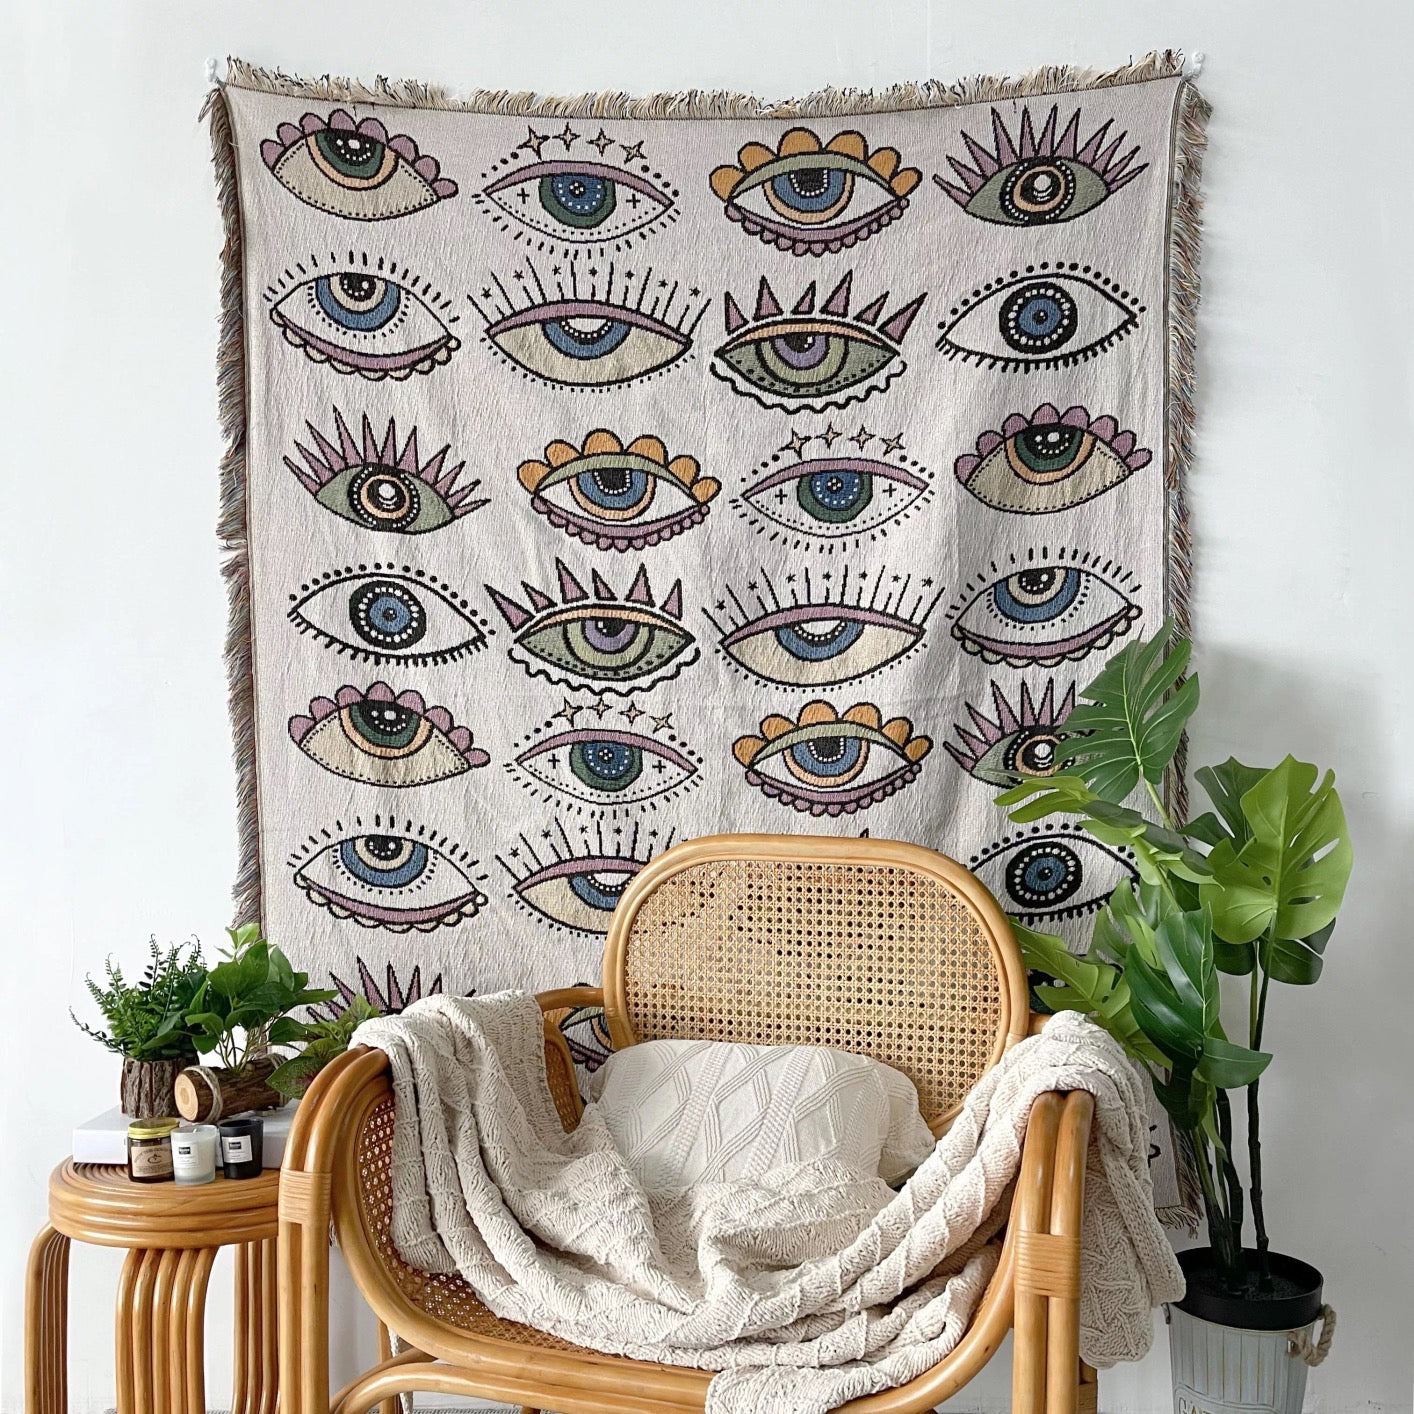 boho blanket nz , boho throw nz  Ideal for home decor, yoga, picnics, beach and campervan  Large boho tapestry with tassels, hippie boho wall tapestry bohemian woven tapestry, boho bed throw boho throw blanket colorful modern boho throw bohemian blanket with tassels Spiritual Tapestries Yoga Meditation Wall Hanging